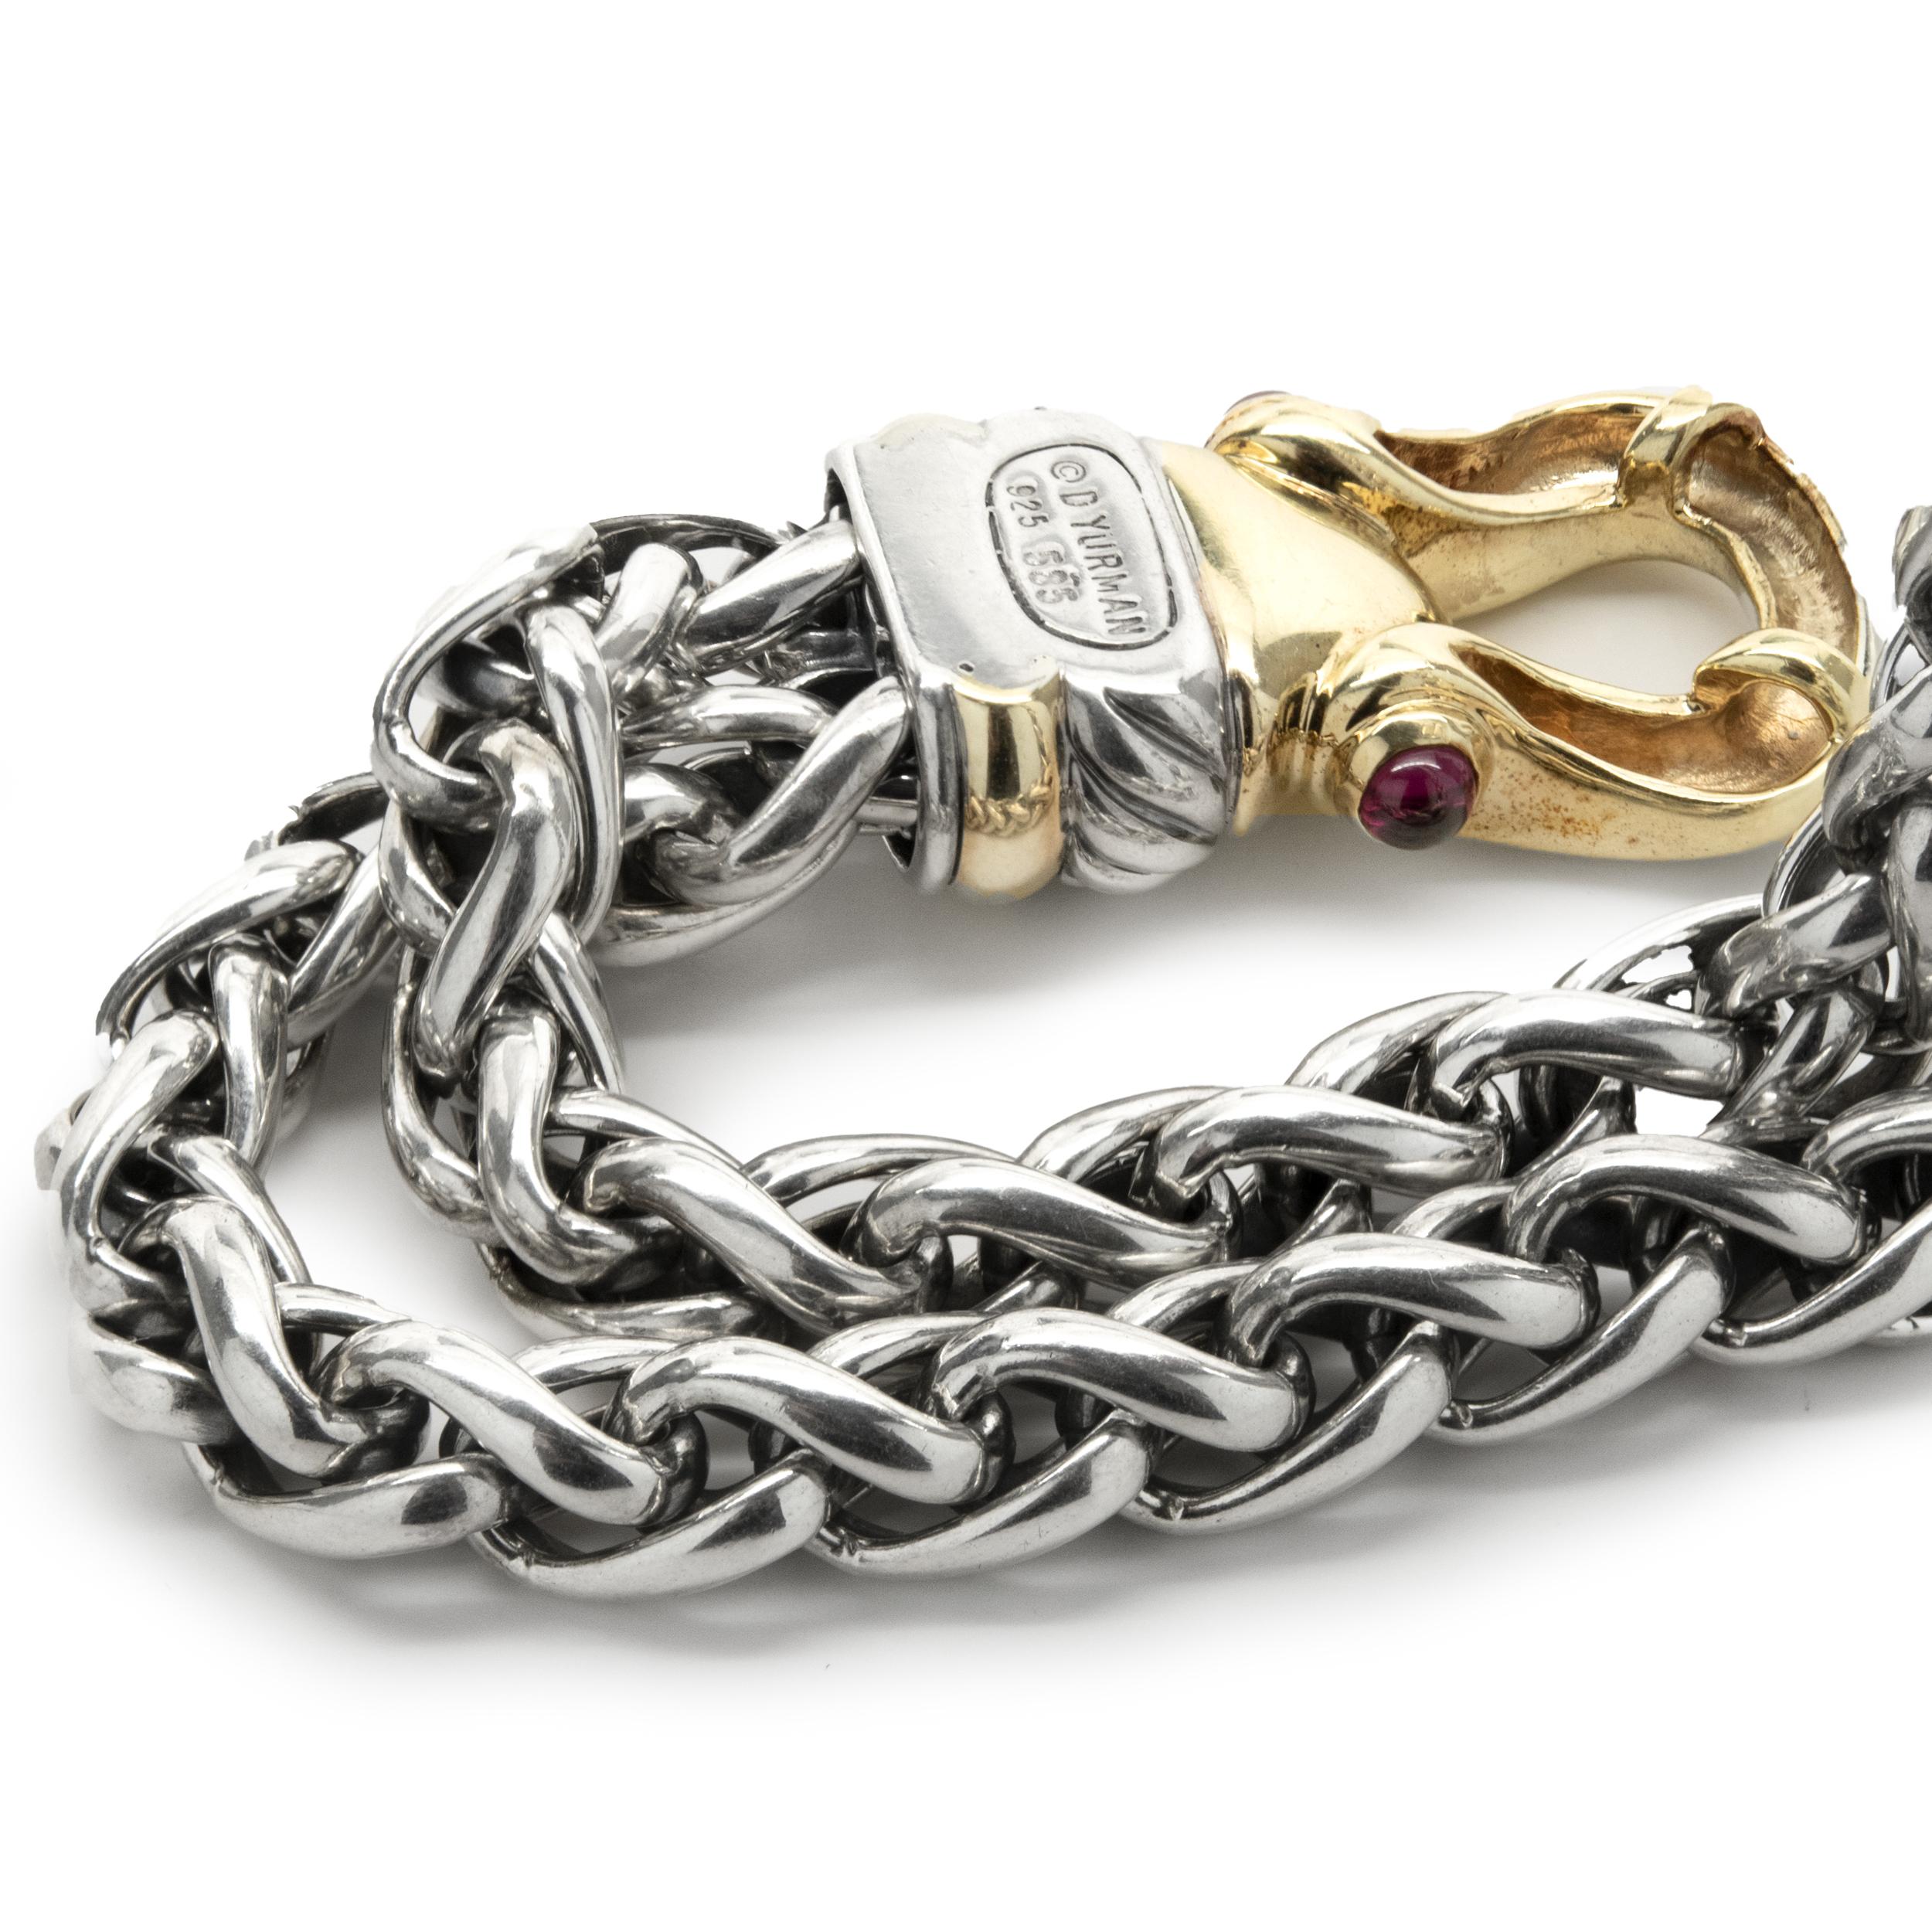 Designer: David Yurman
Material: sterling silver & 14K yellow gold
Dimensions: necklace measures 18-inches in length
Weight: 112.79 grams
